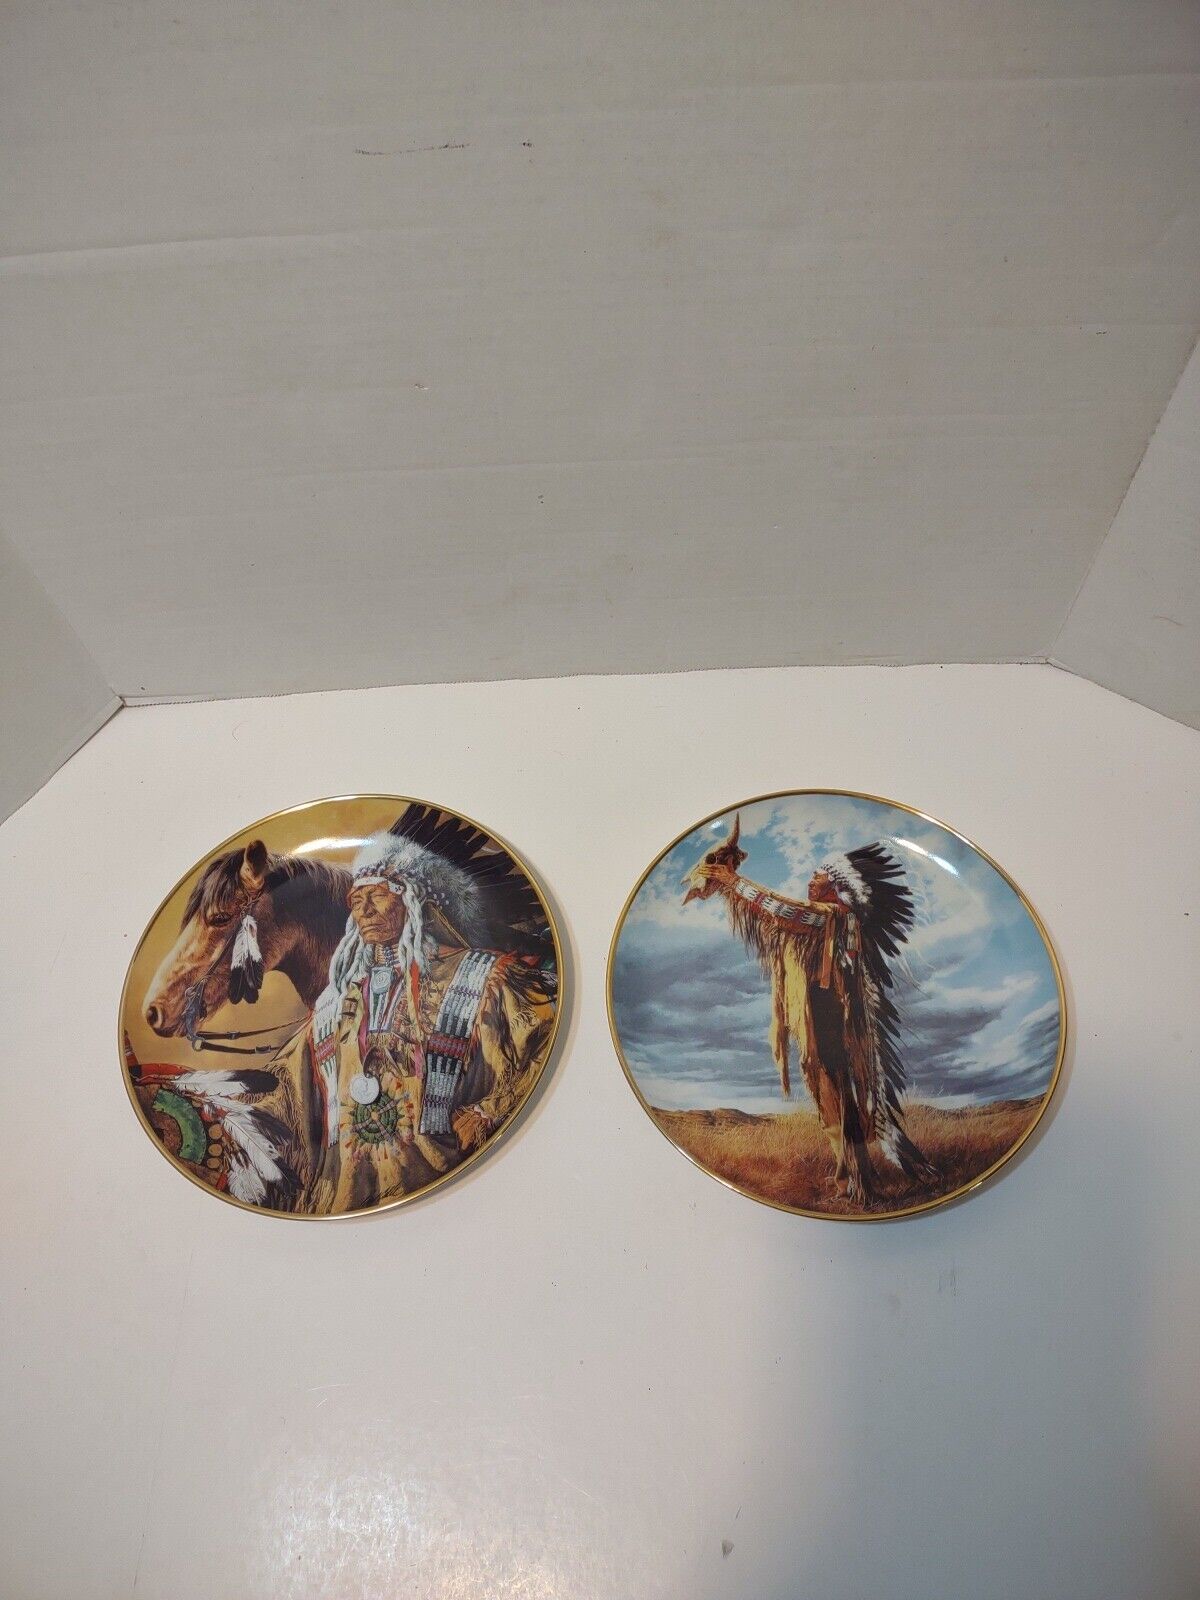 Prayer to the Great Spirit & Pride of the Sioux Paul Calle Porcelain Plate CG